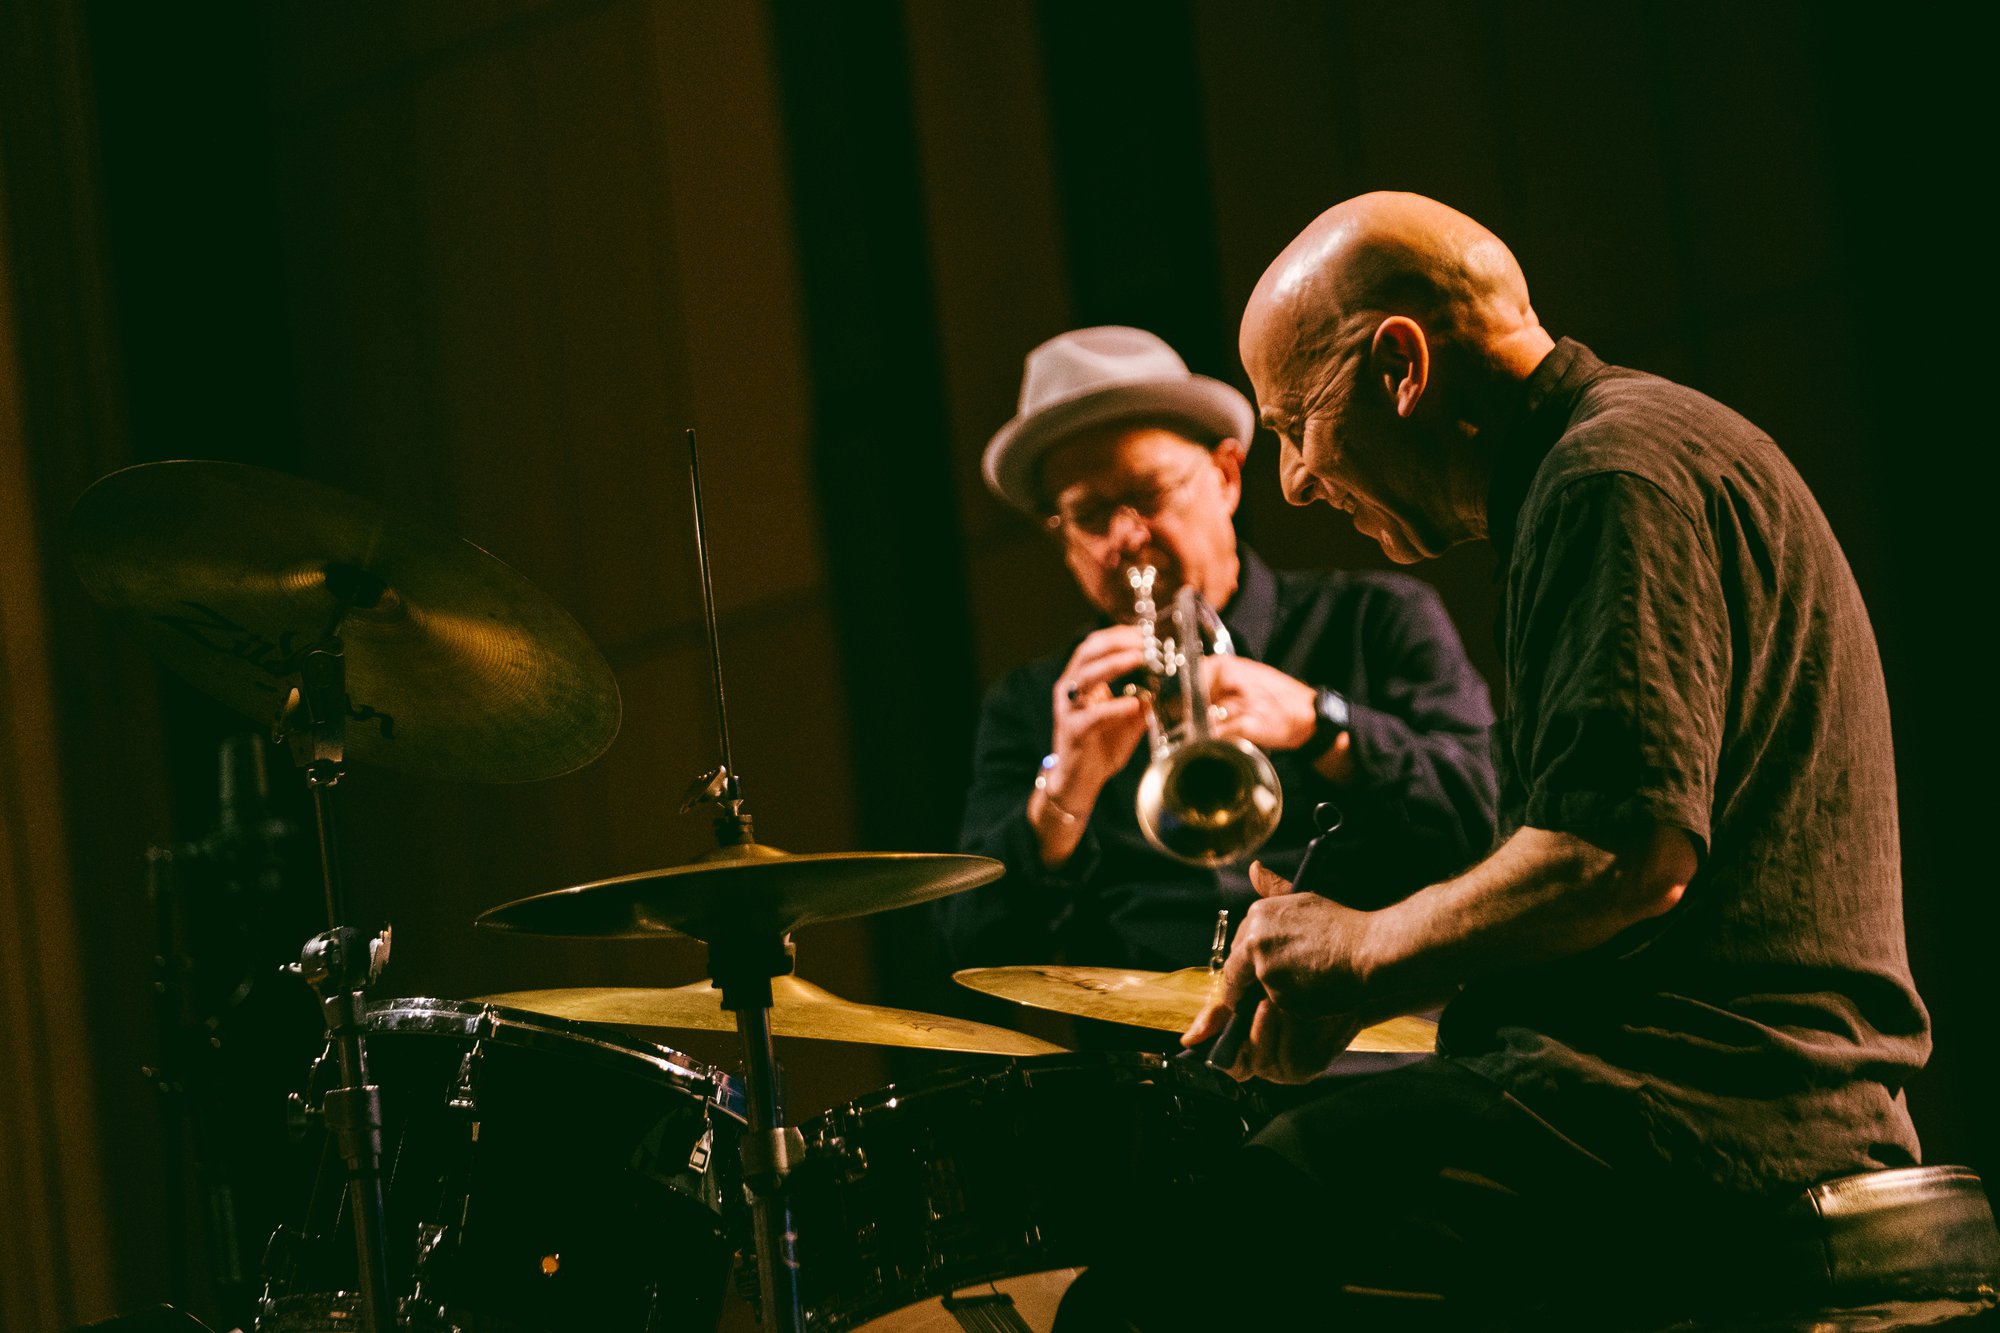 DAVE DOUGLAS & JOEY BARON DUO | 16 APR 2023
> The night we follow Douglas and Baron to New York and witness what is only gained with time: complicity and jazz excellence.
Photography: Vera Marmelo - Culturgest.